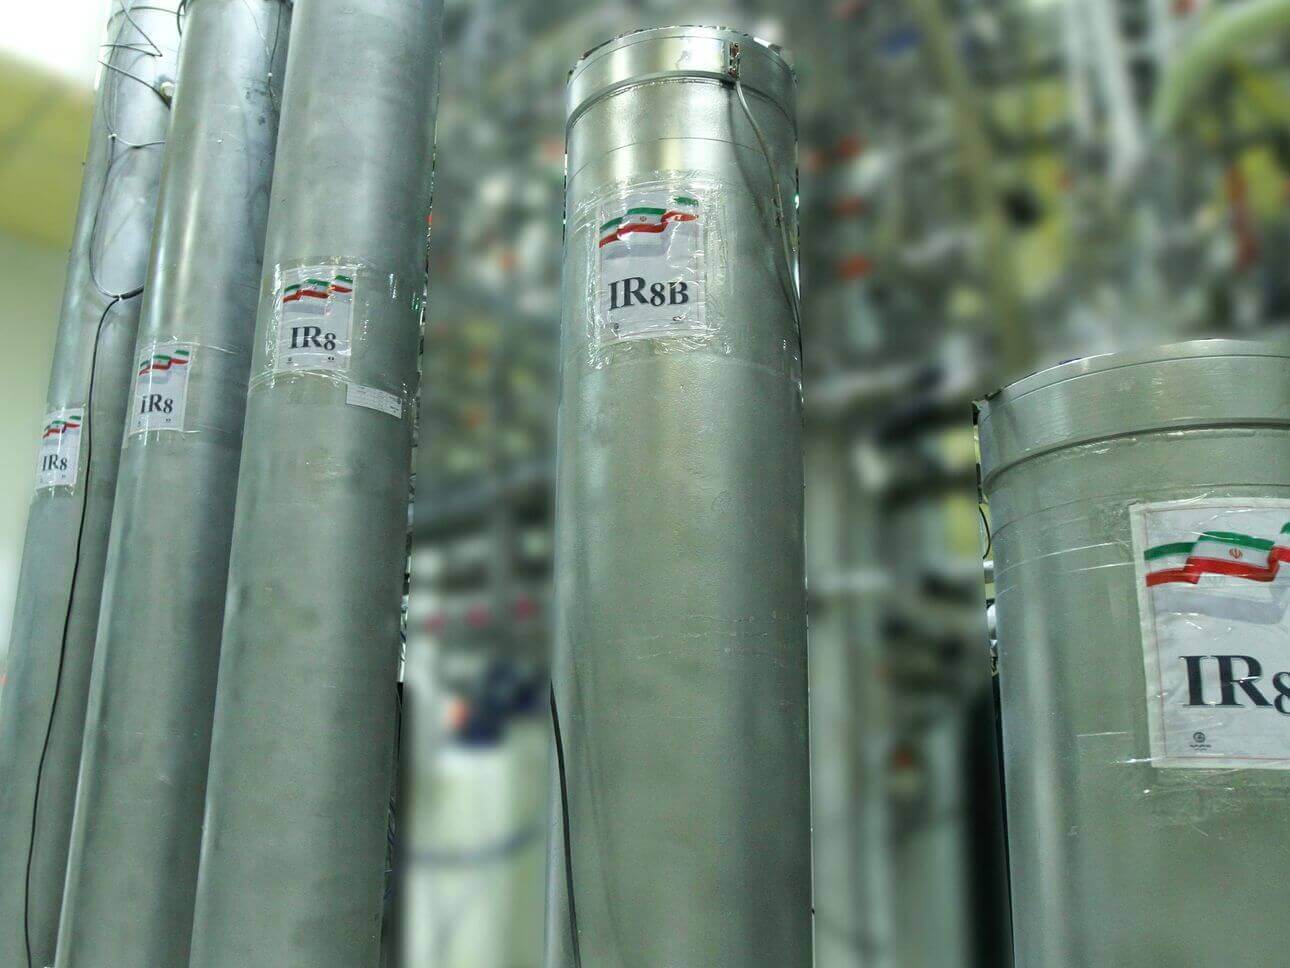 Iran Inches Closer to Developing Nuclear Bomb as IAEA Uncovers Near-Weapons-Grade Uranium